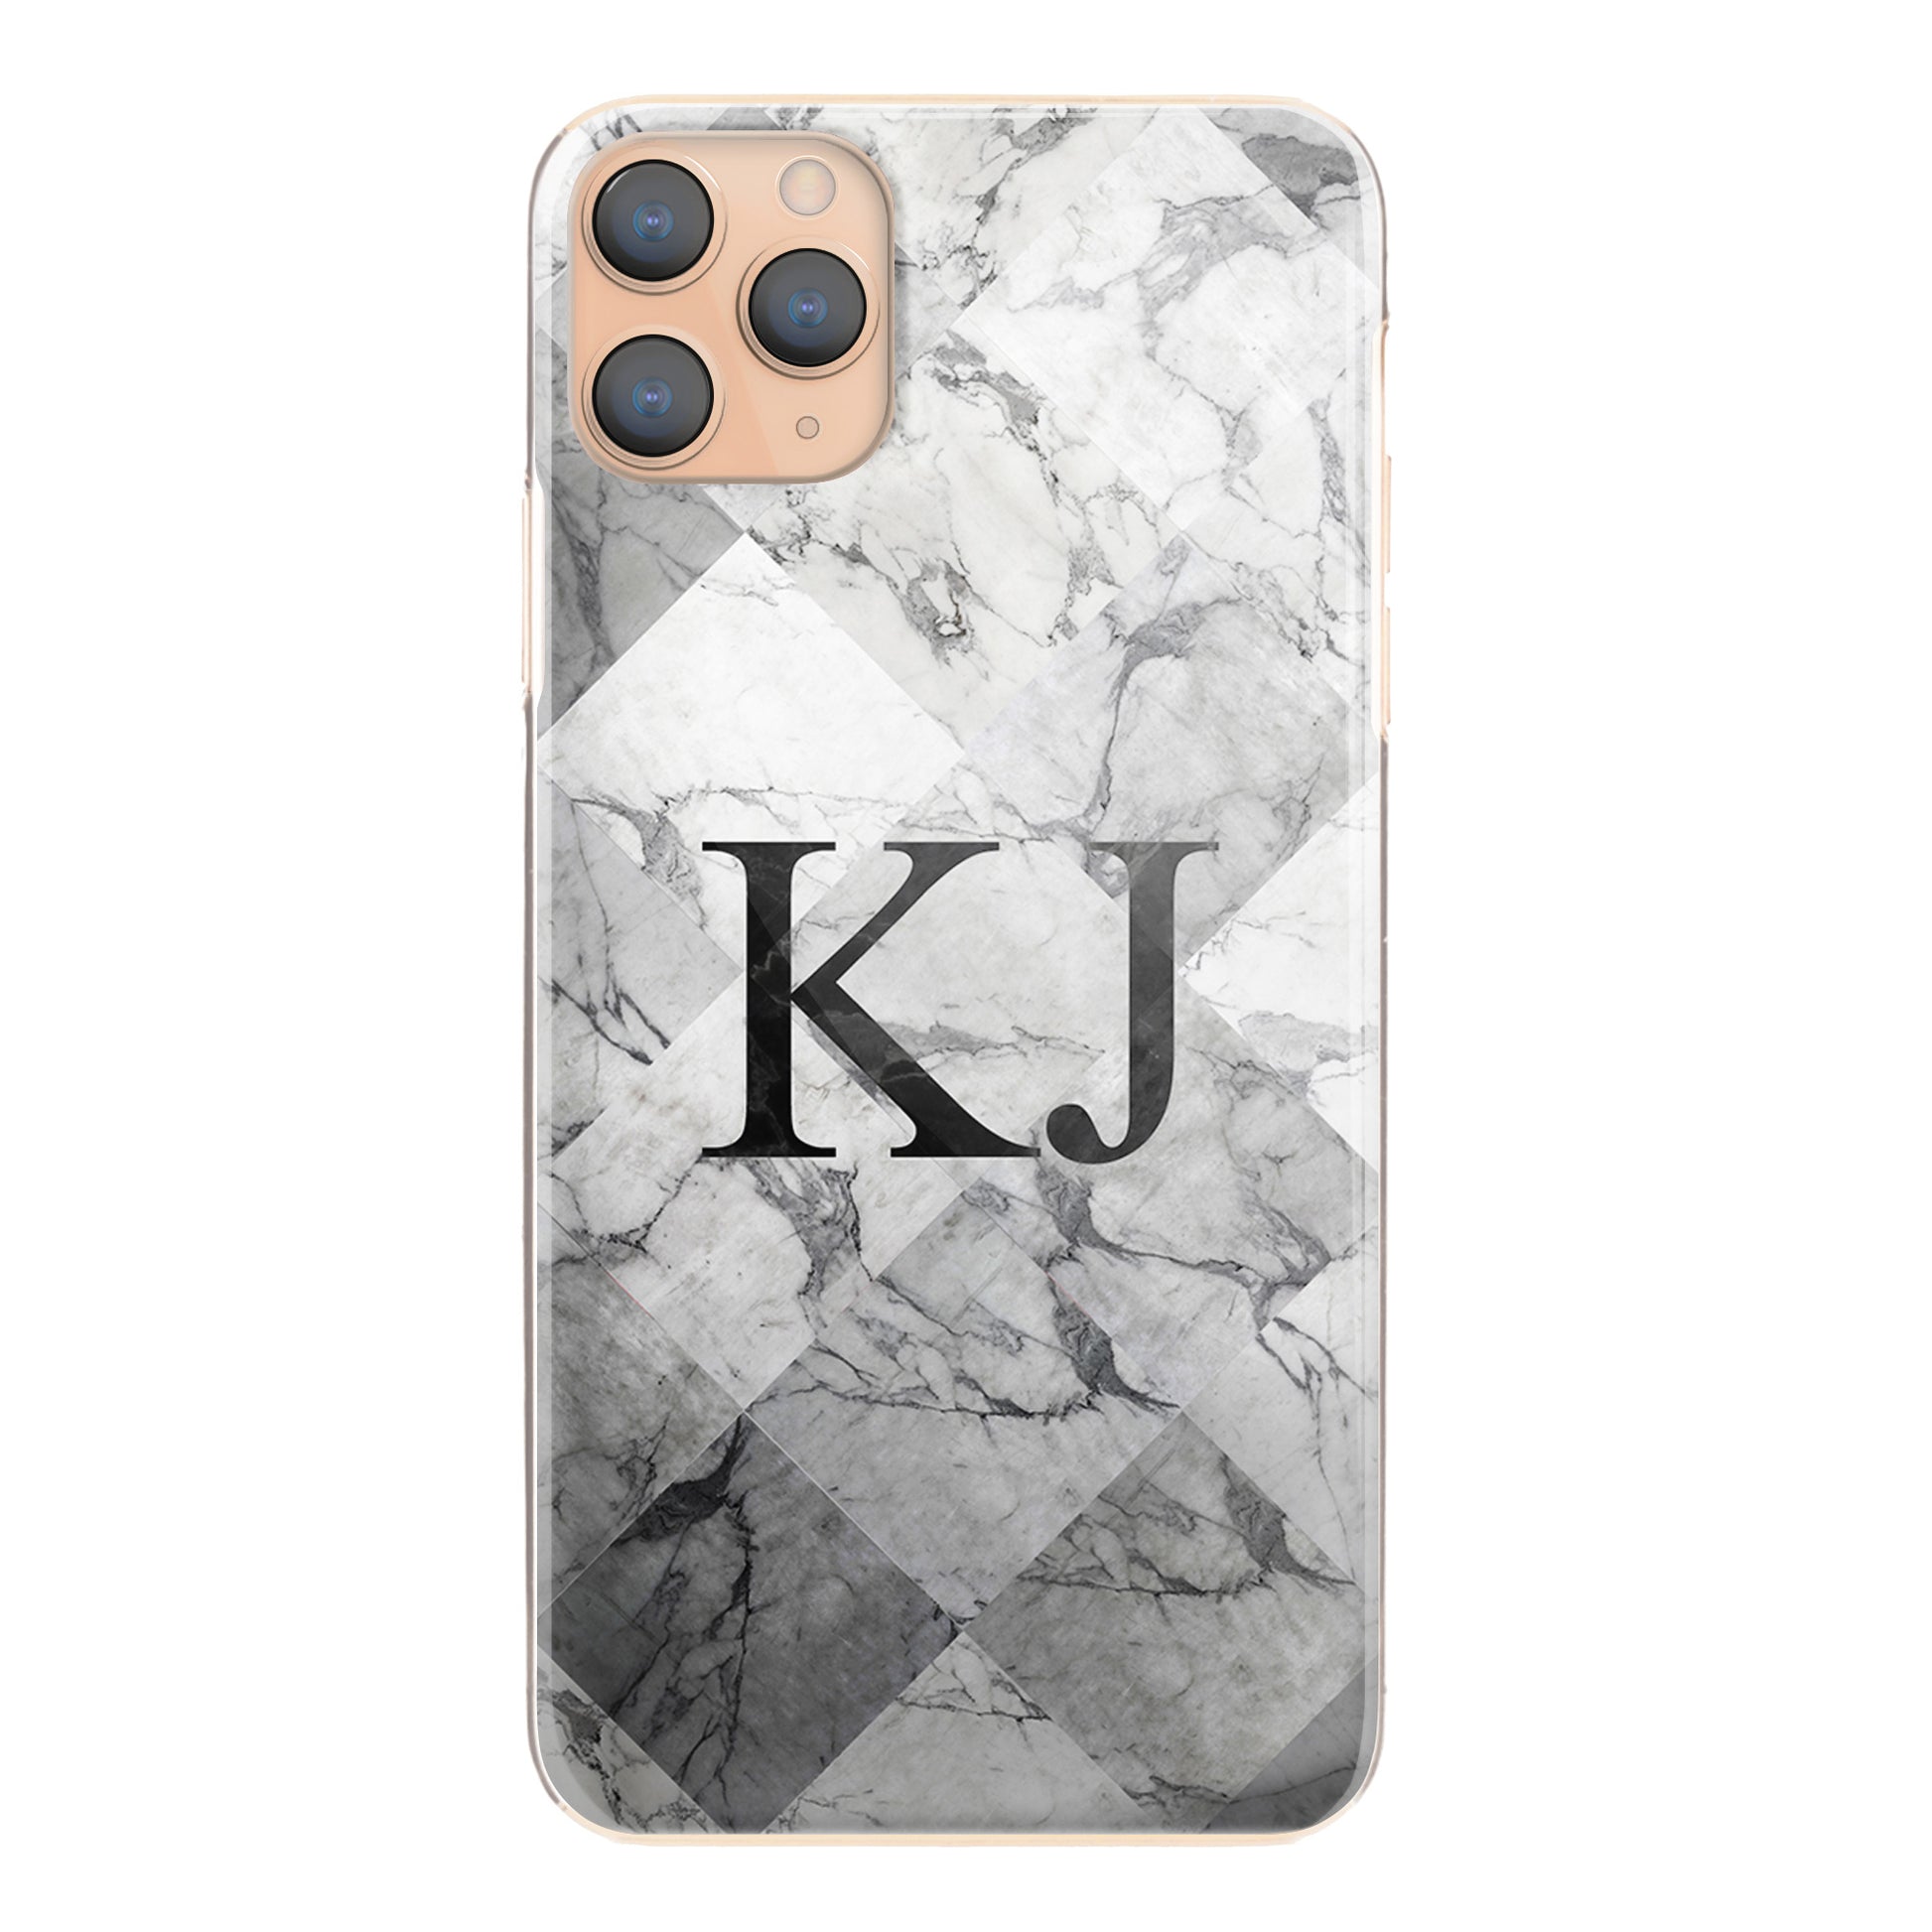 Personalised HTC Phone Hard Case with Traditional Initials on Patterned Grey Marble